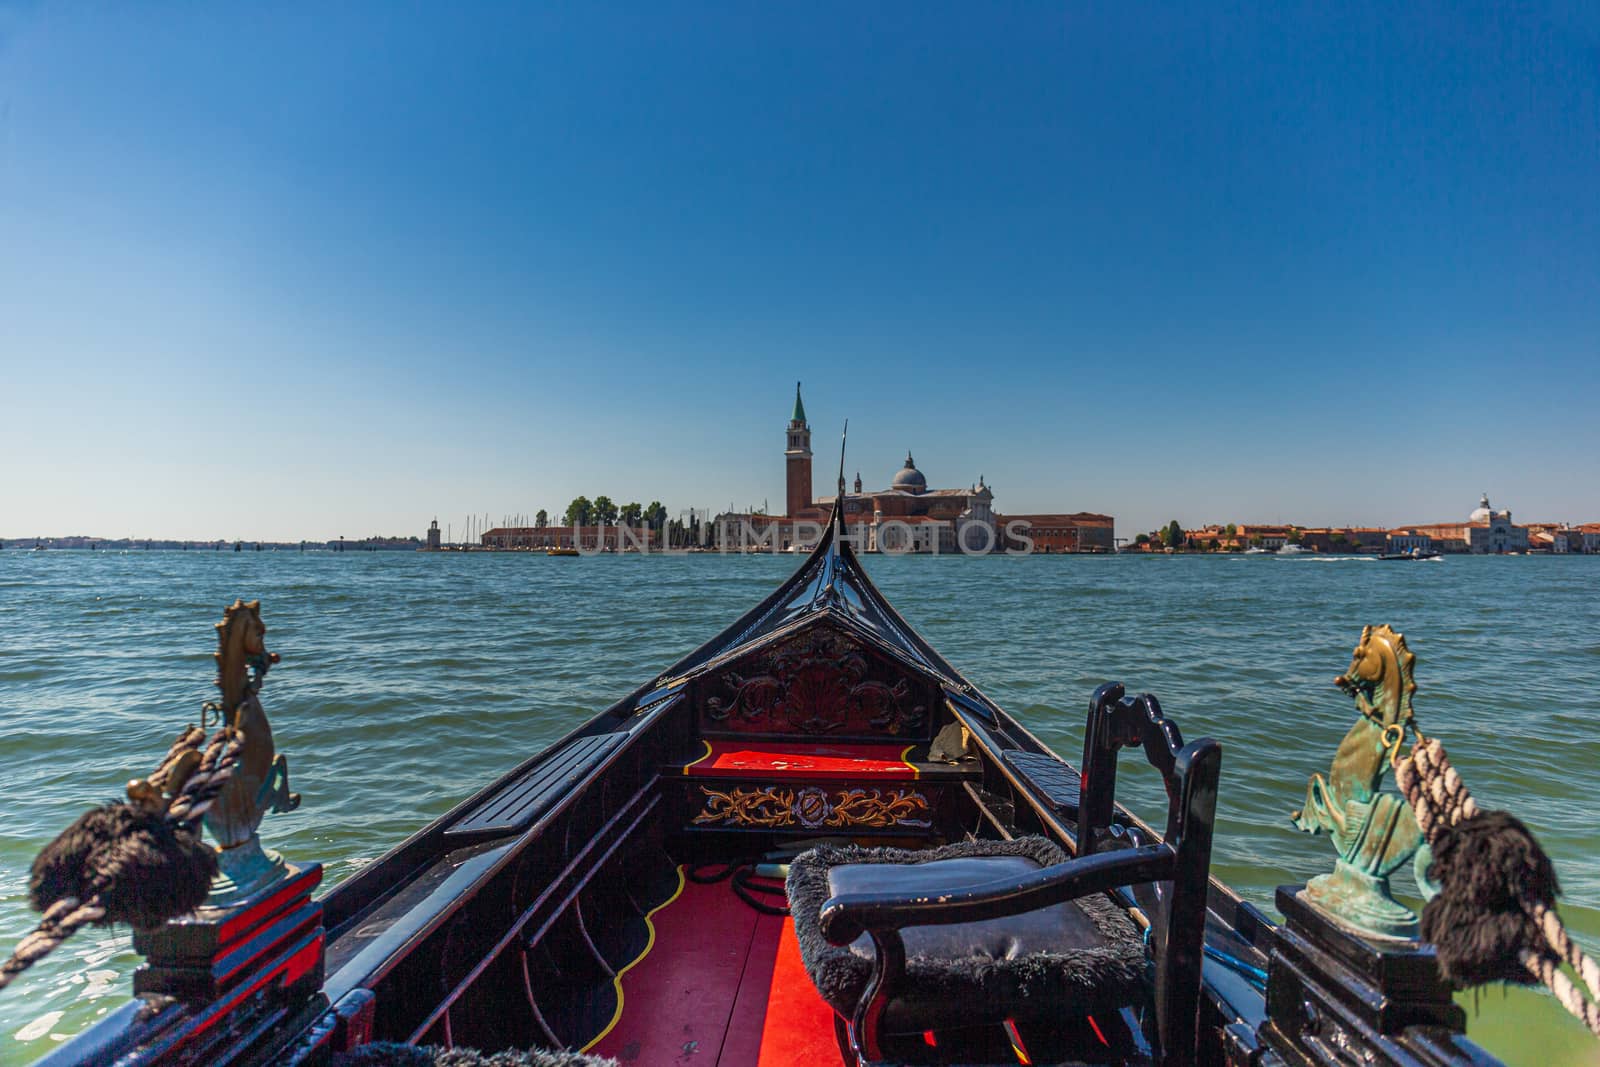 Point of view in an gondola boat in the Grand Canal in Venice